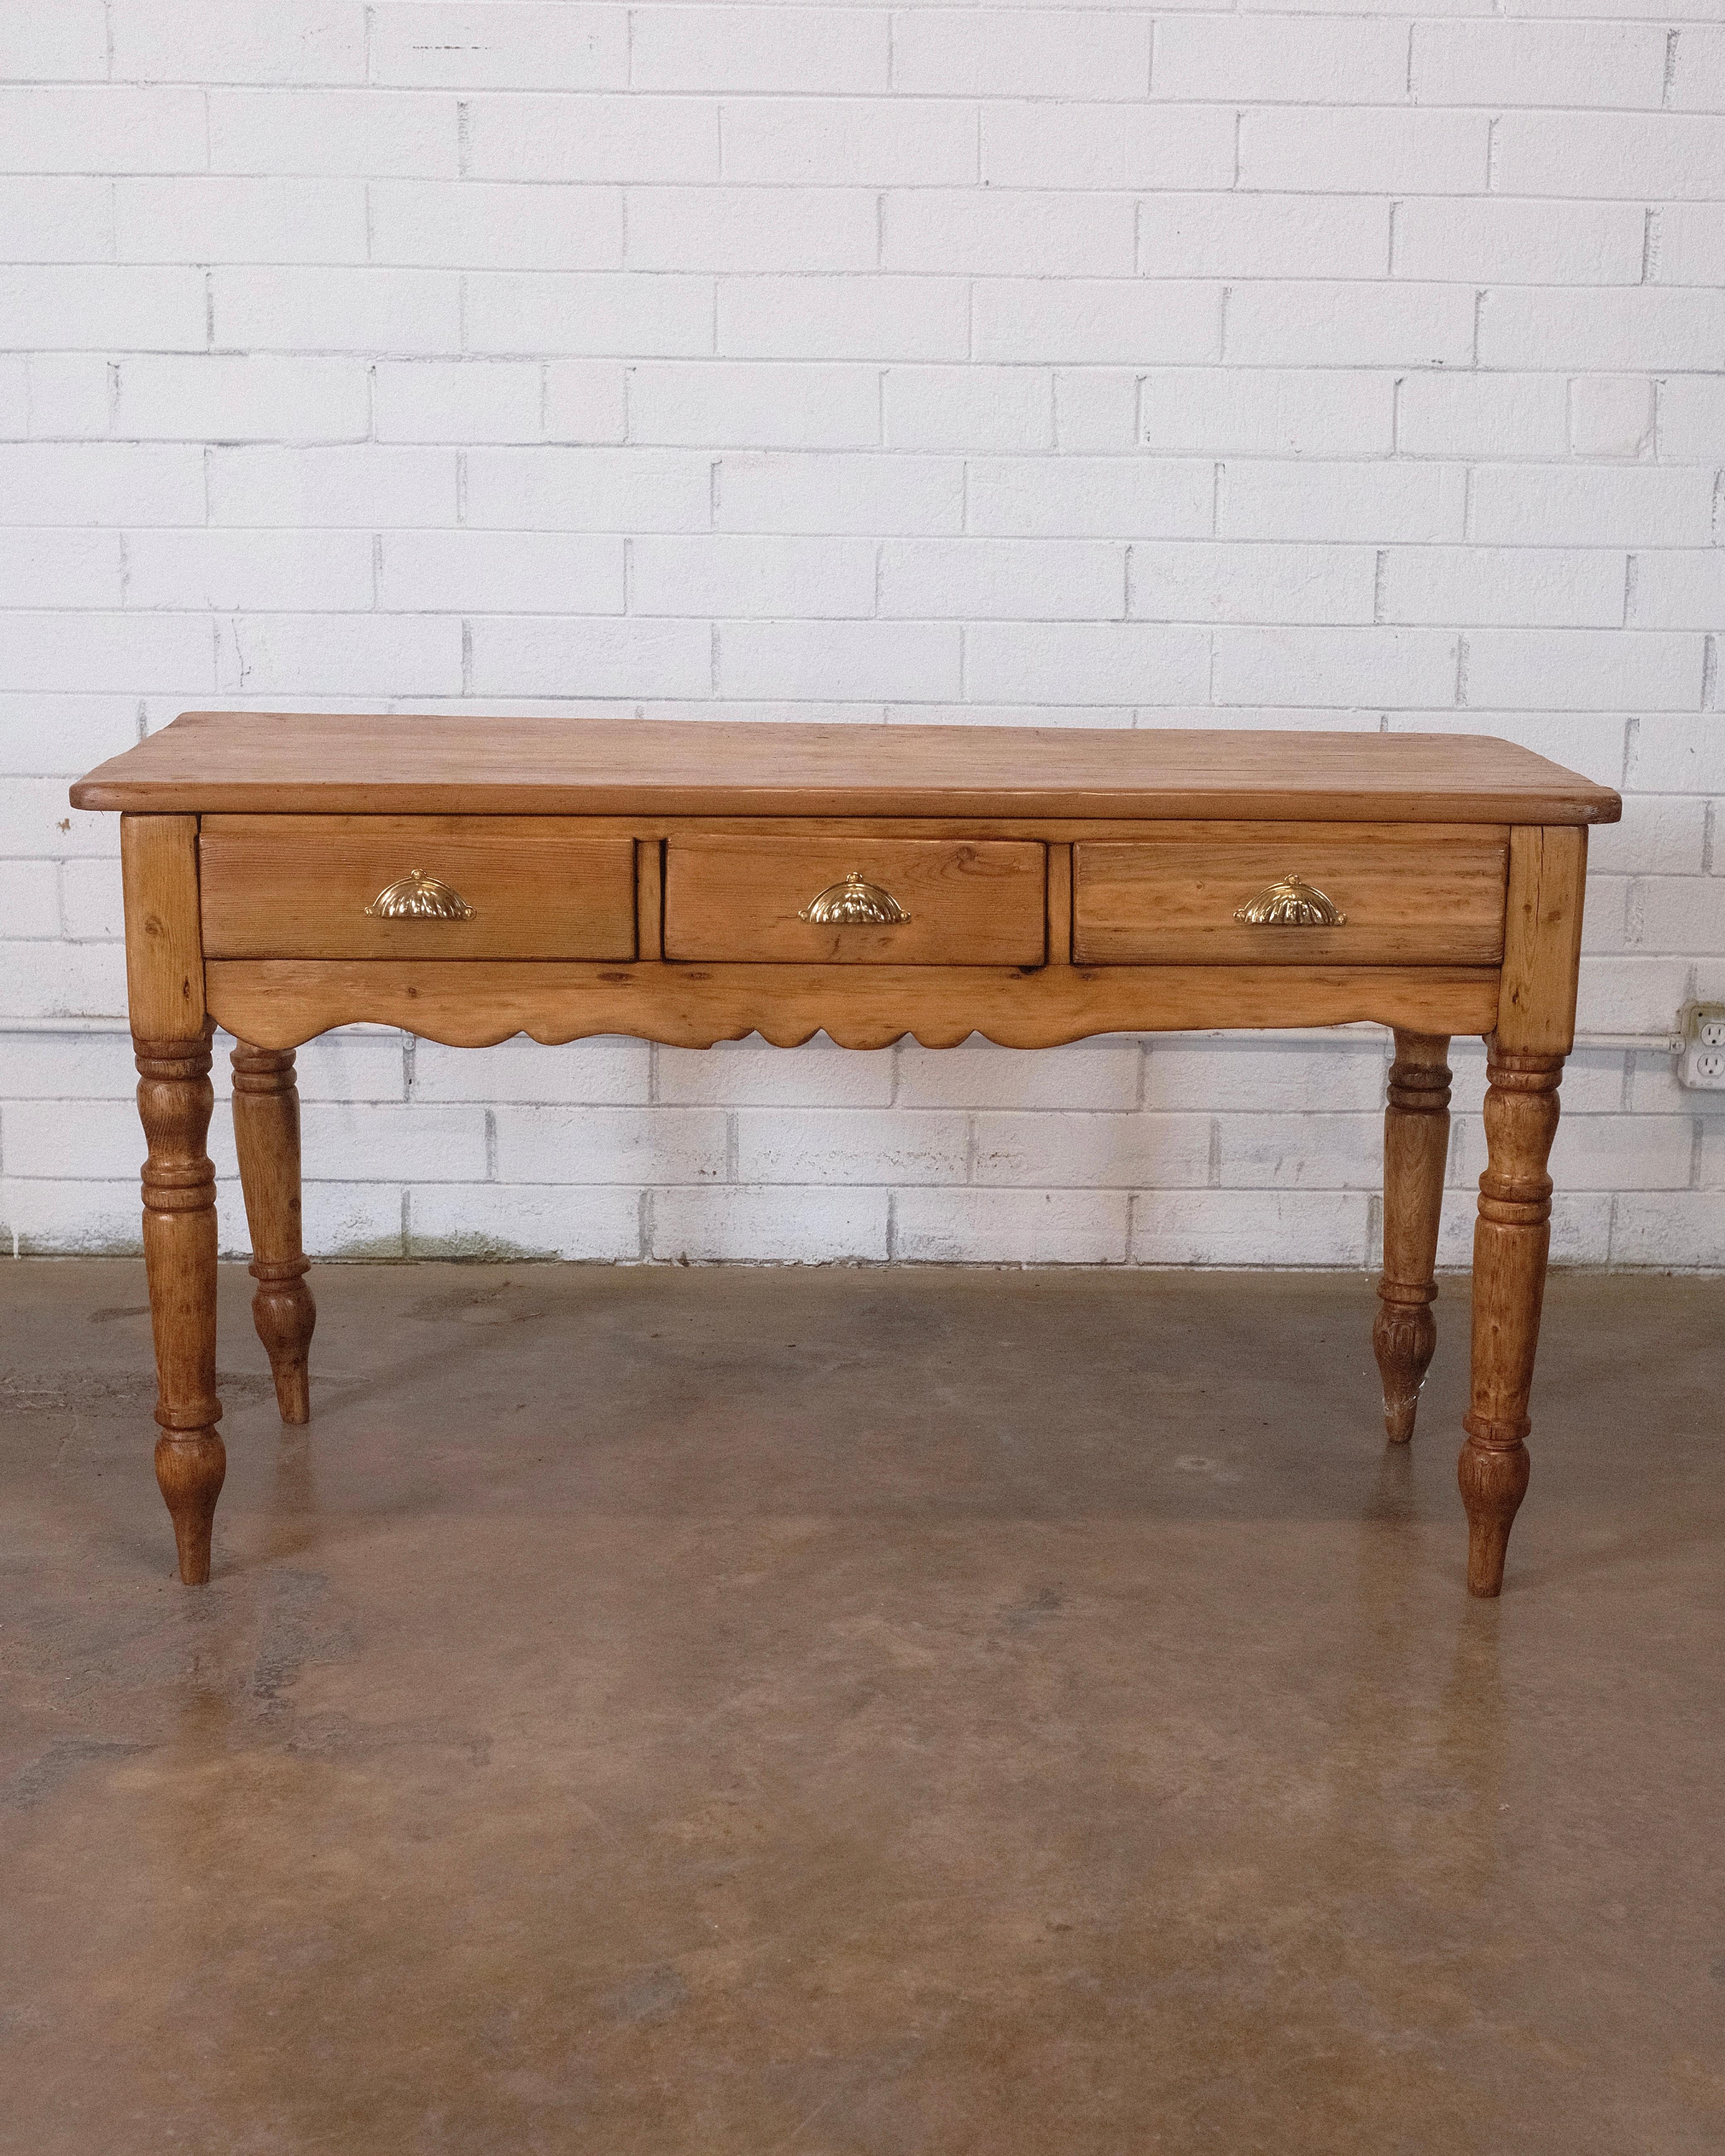 This charming 19th-century country English provincial farmhouse work table, console, or sideboard is a delightful piece crafted from pine. Its warm and rustic aesthetic embodies the character of a bygone era, making it a versatile addition to any